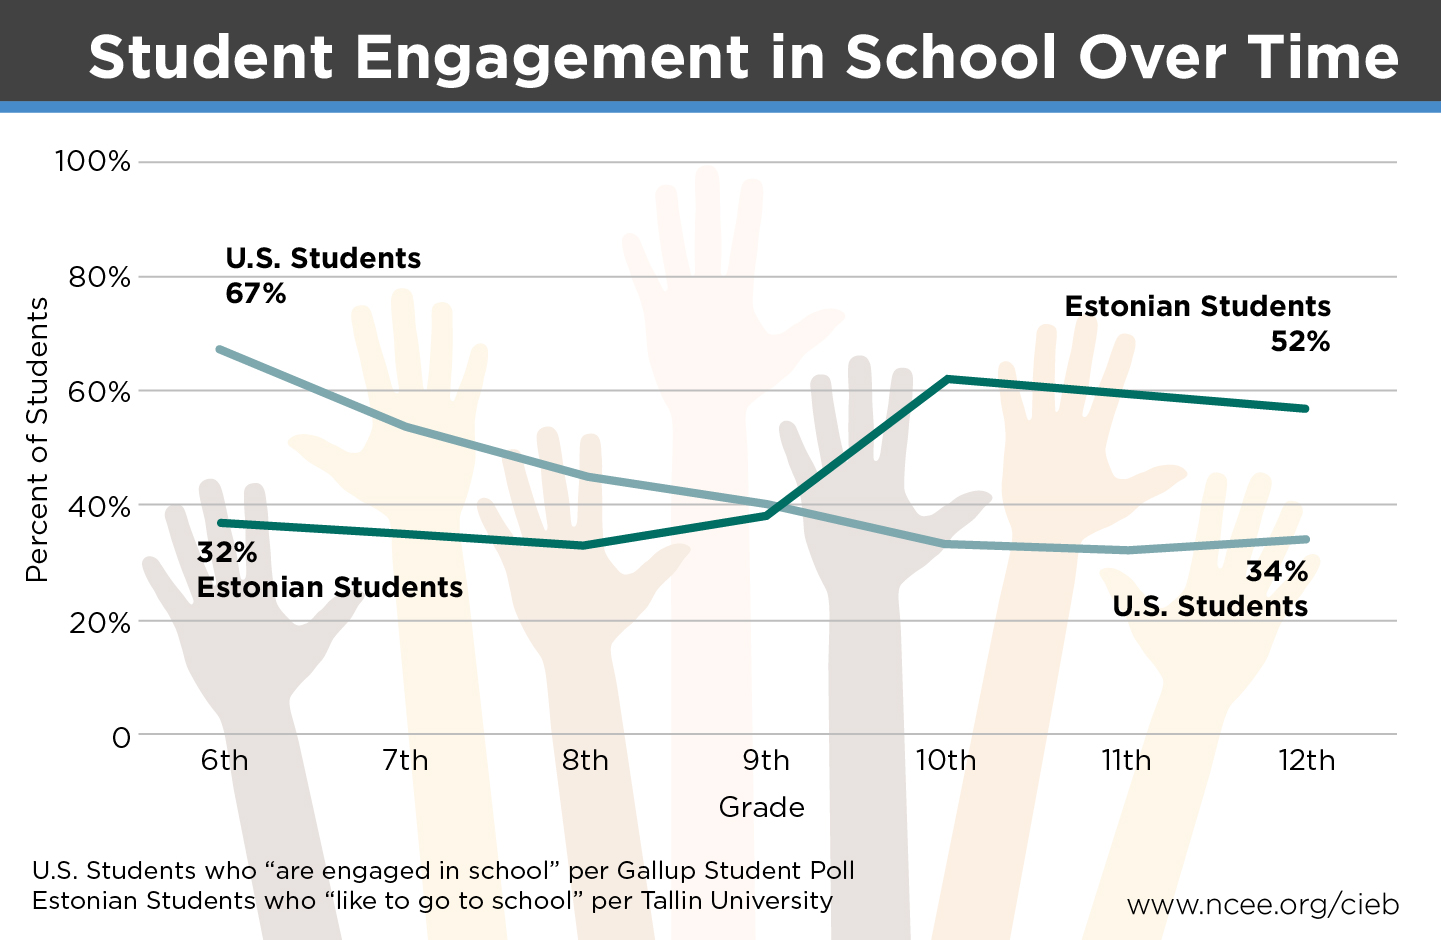 Student engagement in school decreases over time in the U.S., but increases for Estonian students as they approach high school